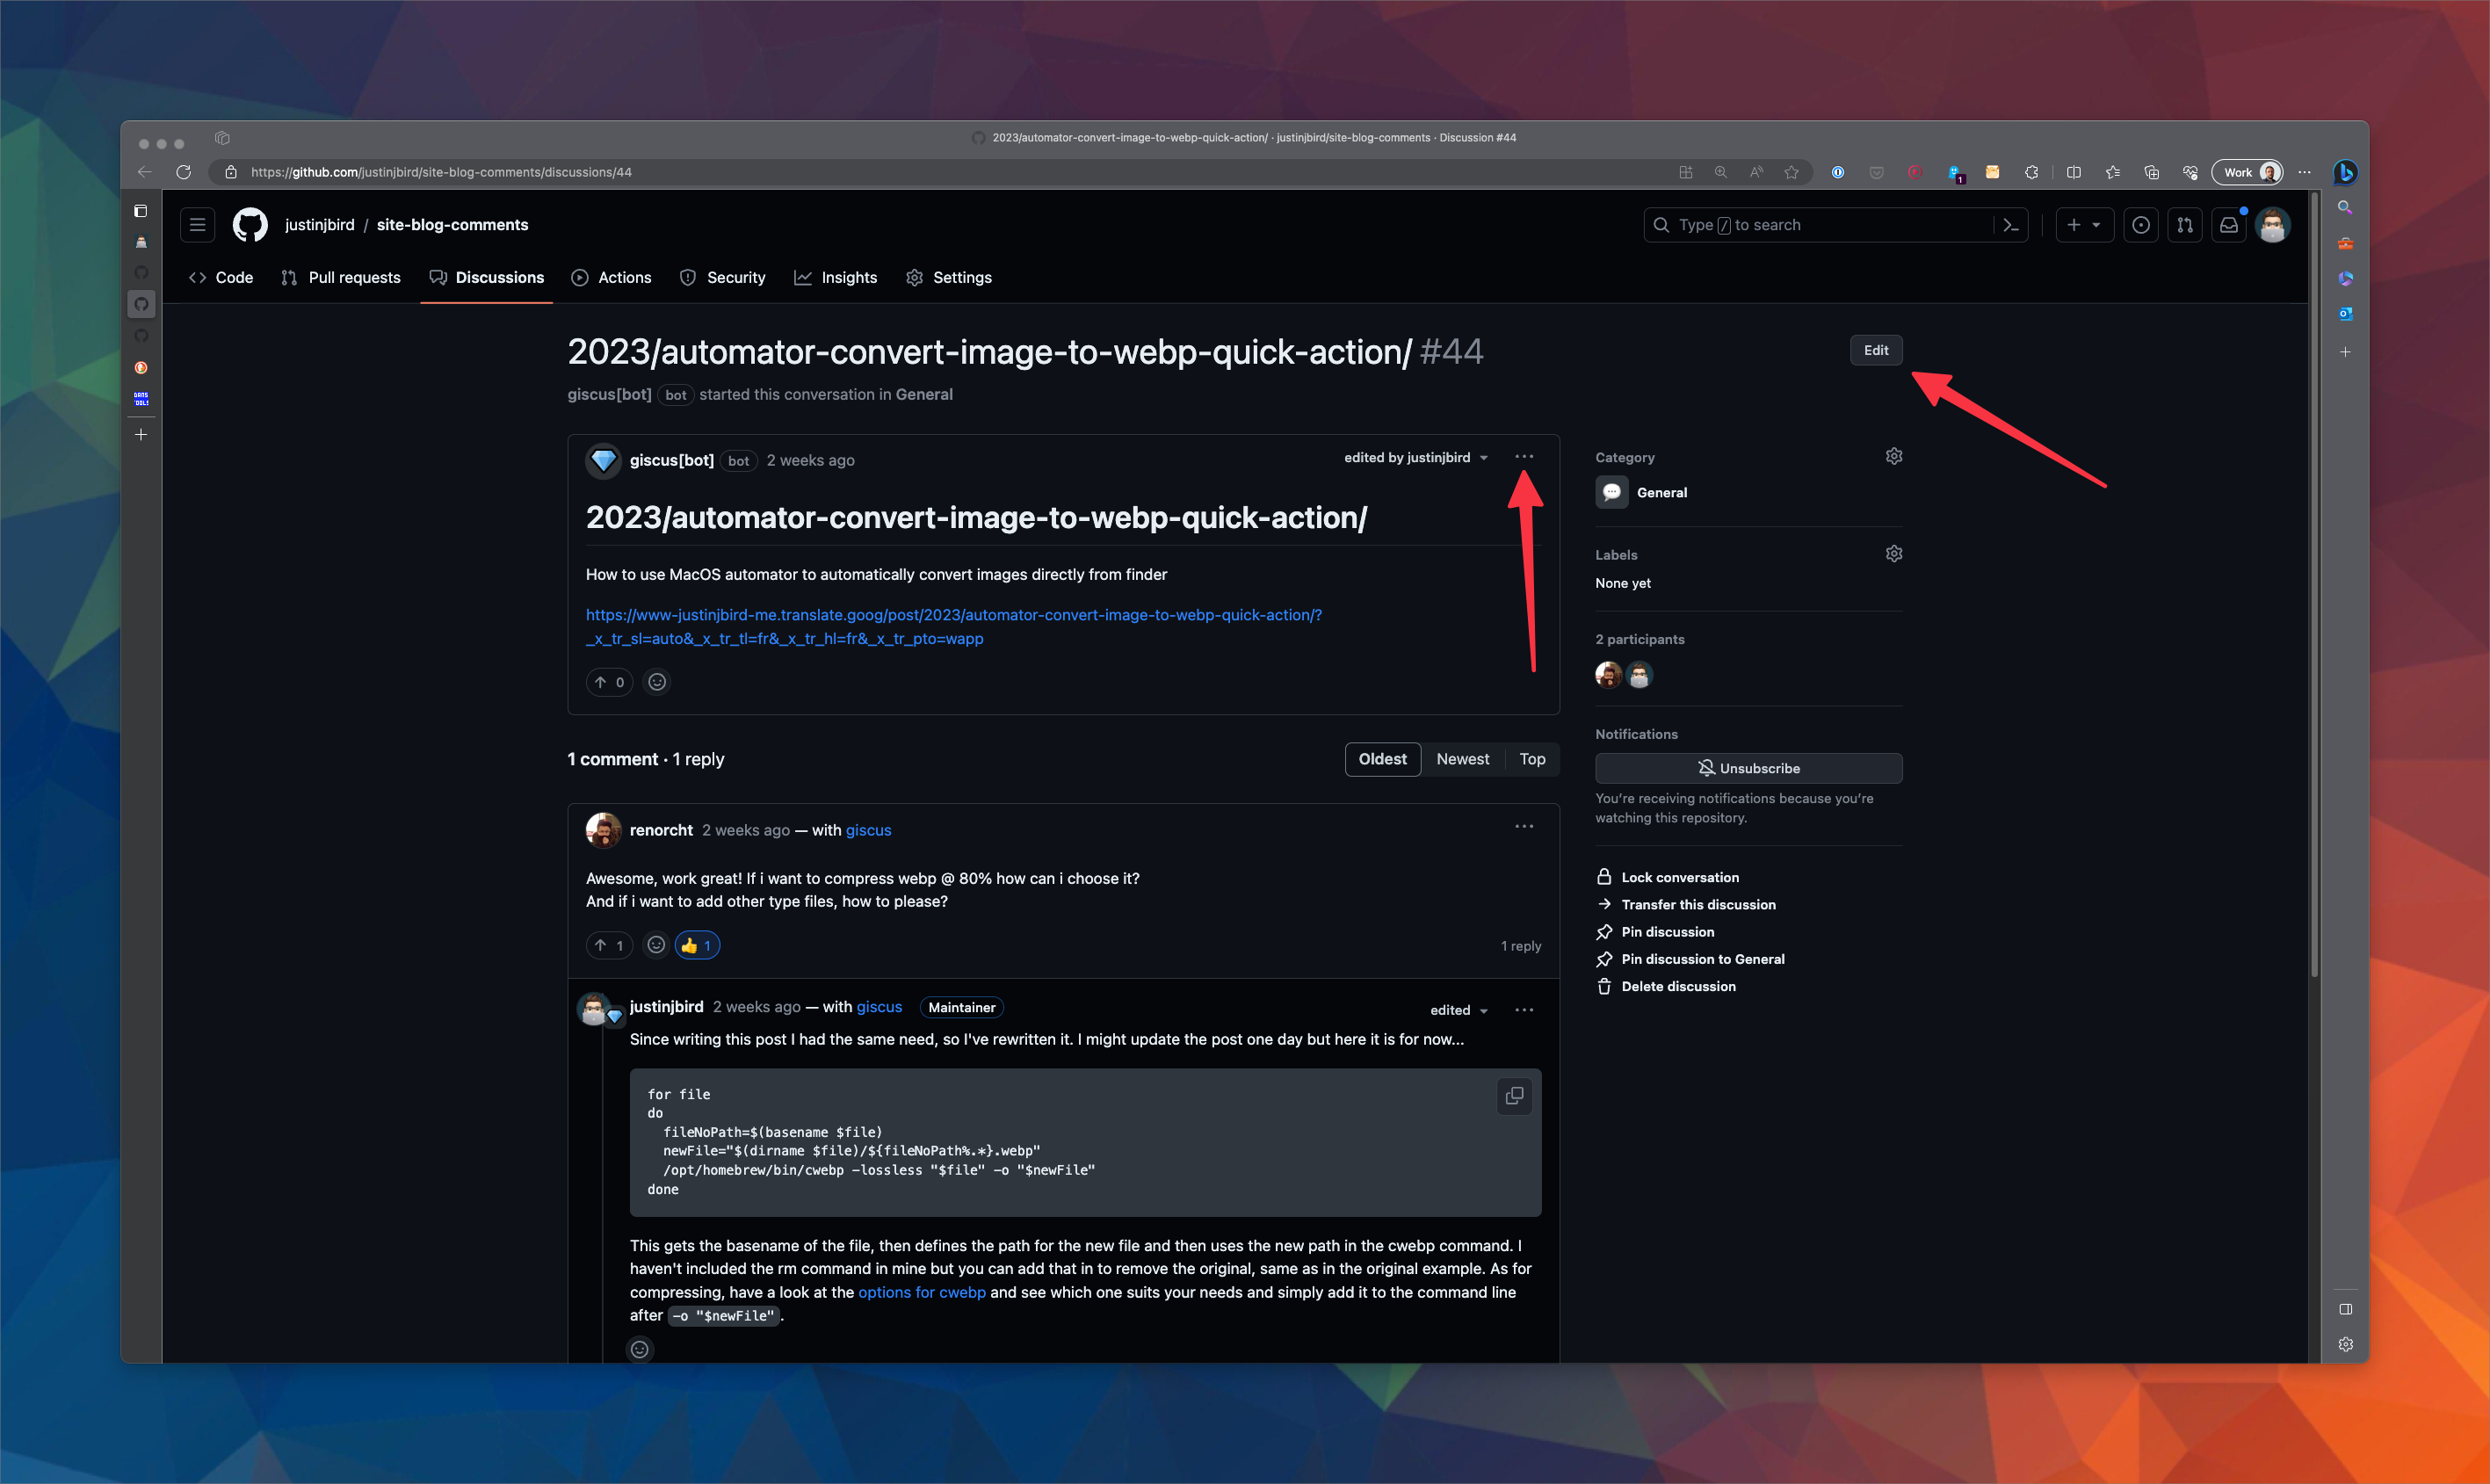 screenshot shows the github discussion, there is an edit button to the right of the title that allows you to edit the title, the discussion block has an ellipses button next to it which allows you to edit the discussion